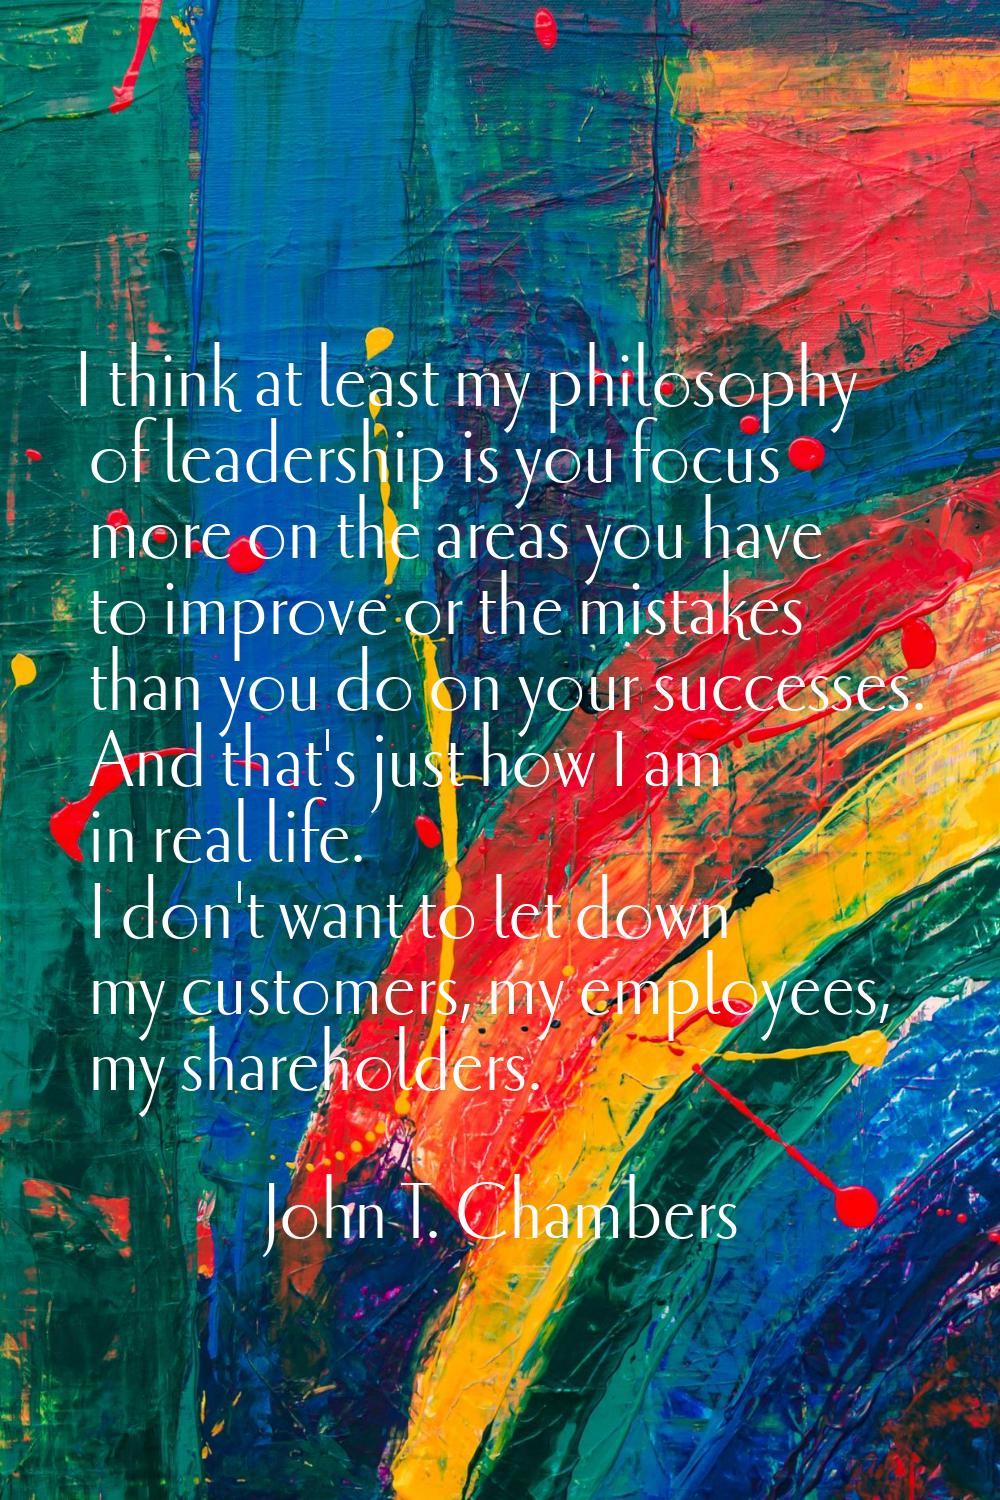 I think at least my philosophy of leadership is you focus more on the areas you have to improve or 